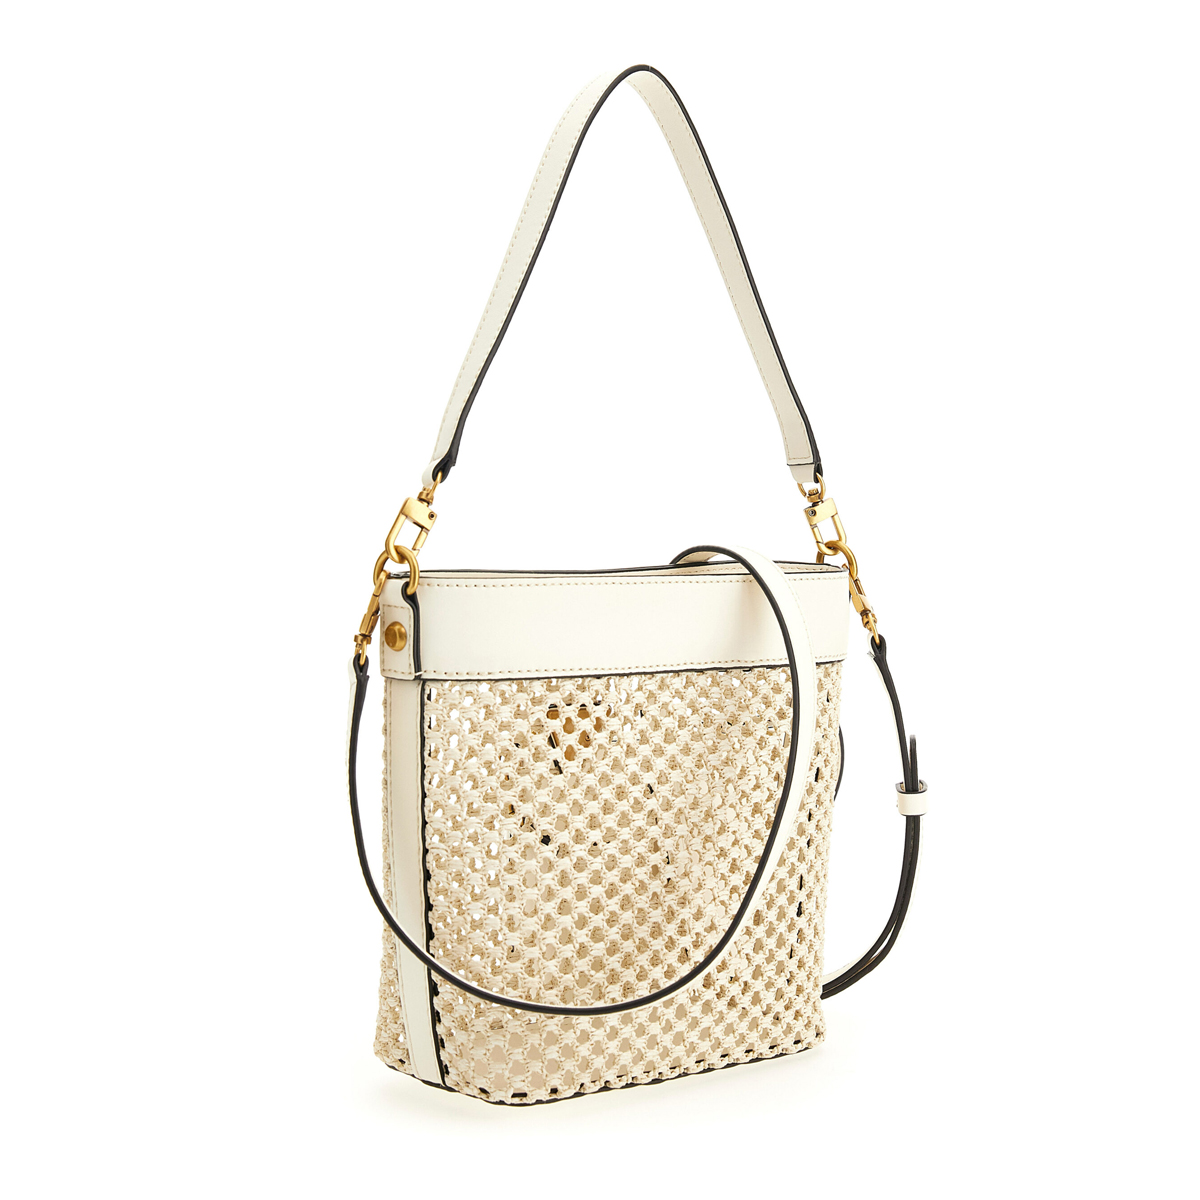 Buy Vikky Tote Bag - Off White Online in Iraq